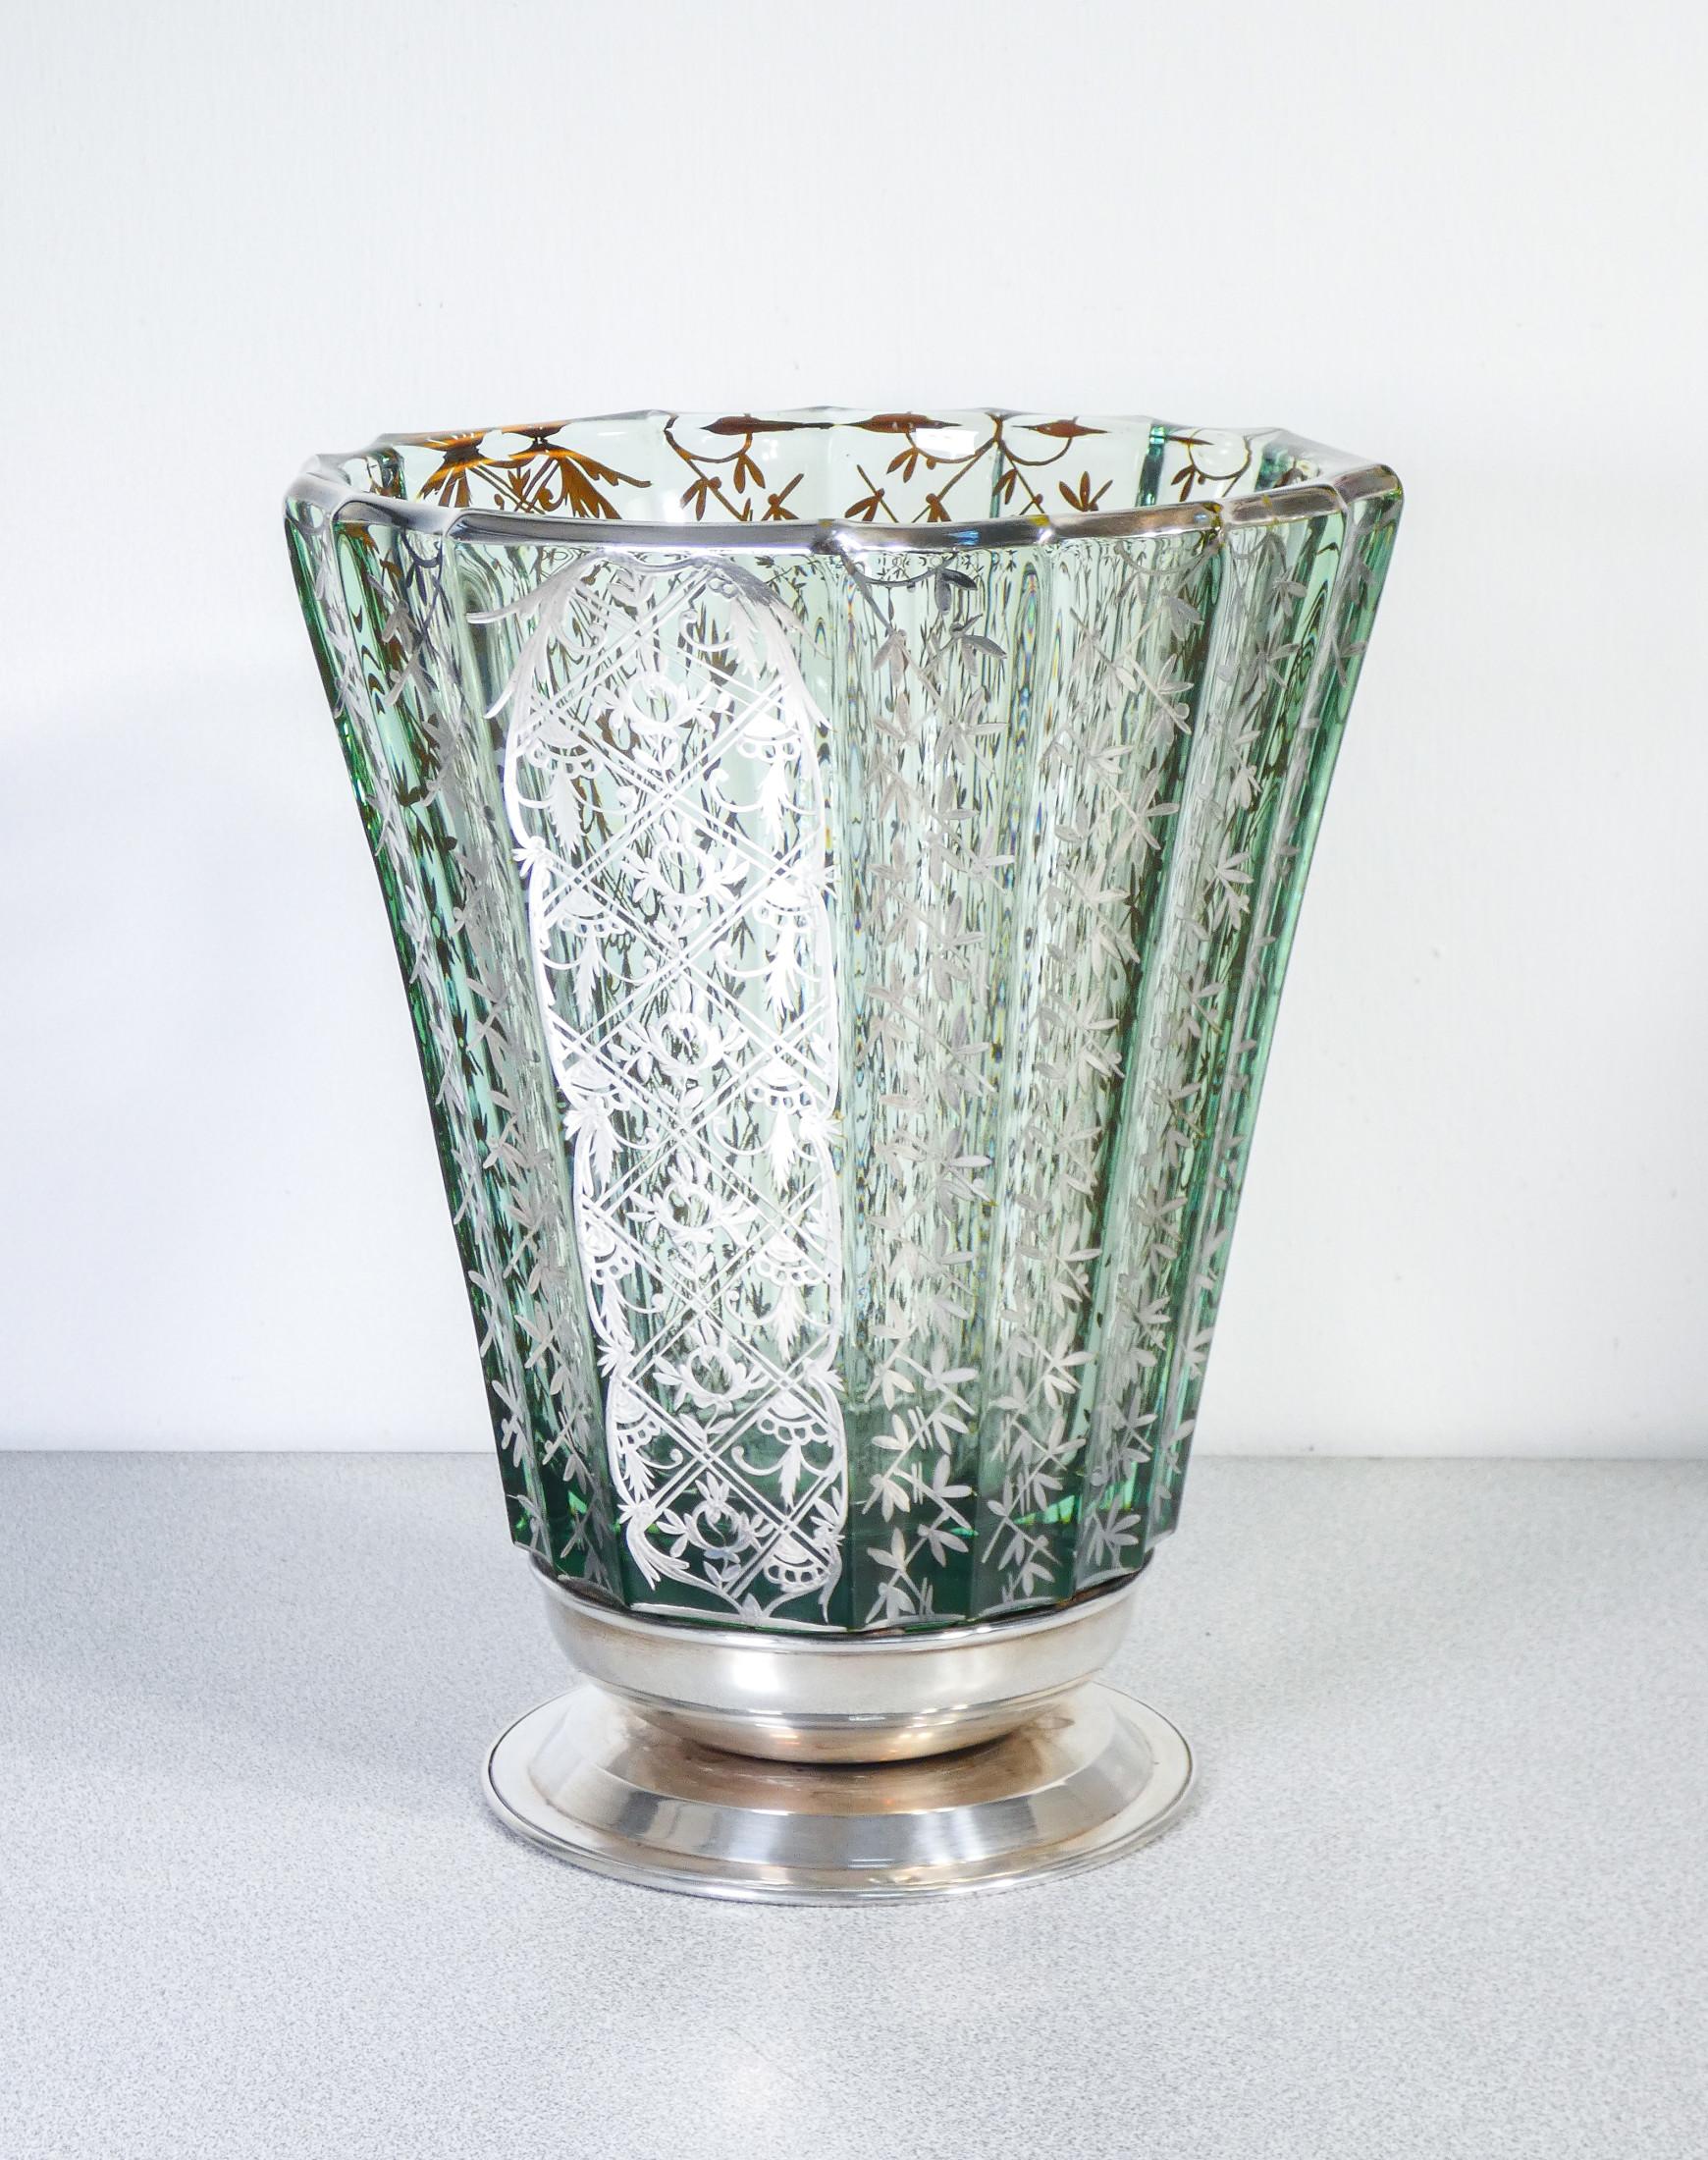 Blown glass vase
with silver decorations.

ORIGIN
Italy

PERIOD
Early twentieth century

MATERIALS
Blown glass and silver

DIMENSIONS
Ø 22 cm
H 27 cm

CONDITIONS
Excellent. No cracks or chipping. Evaluate through the attached photos.

SHIPPING
Free